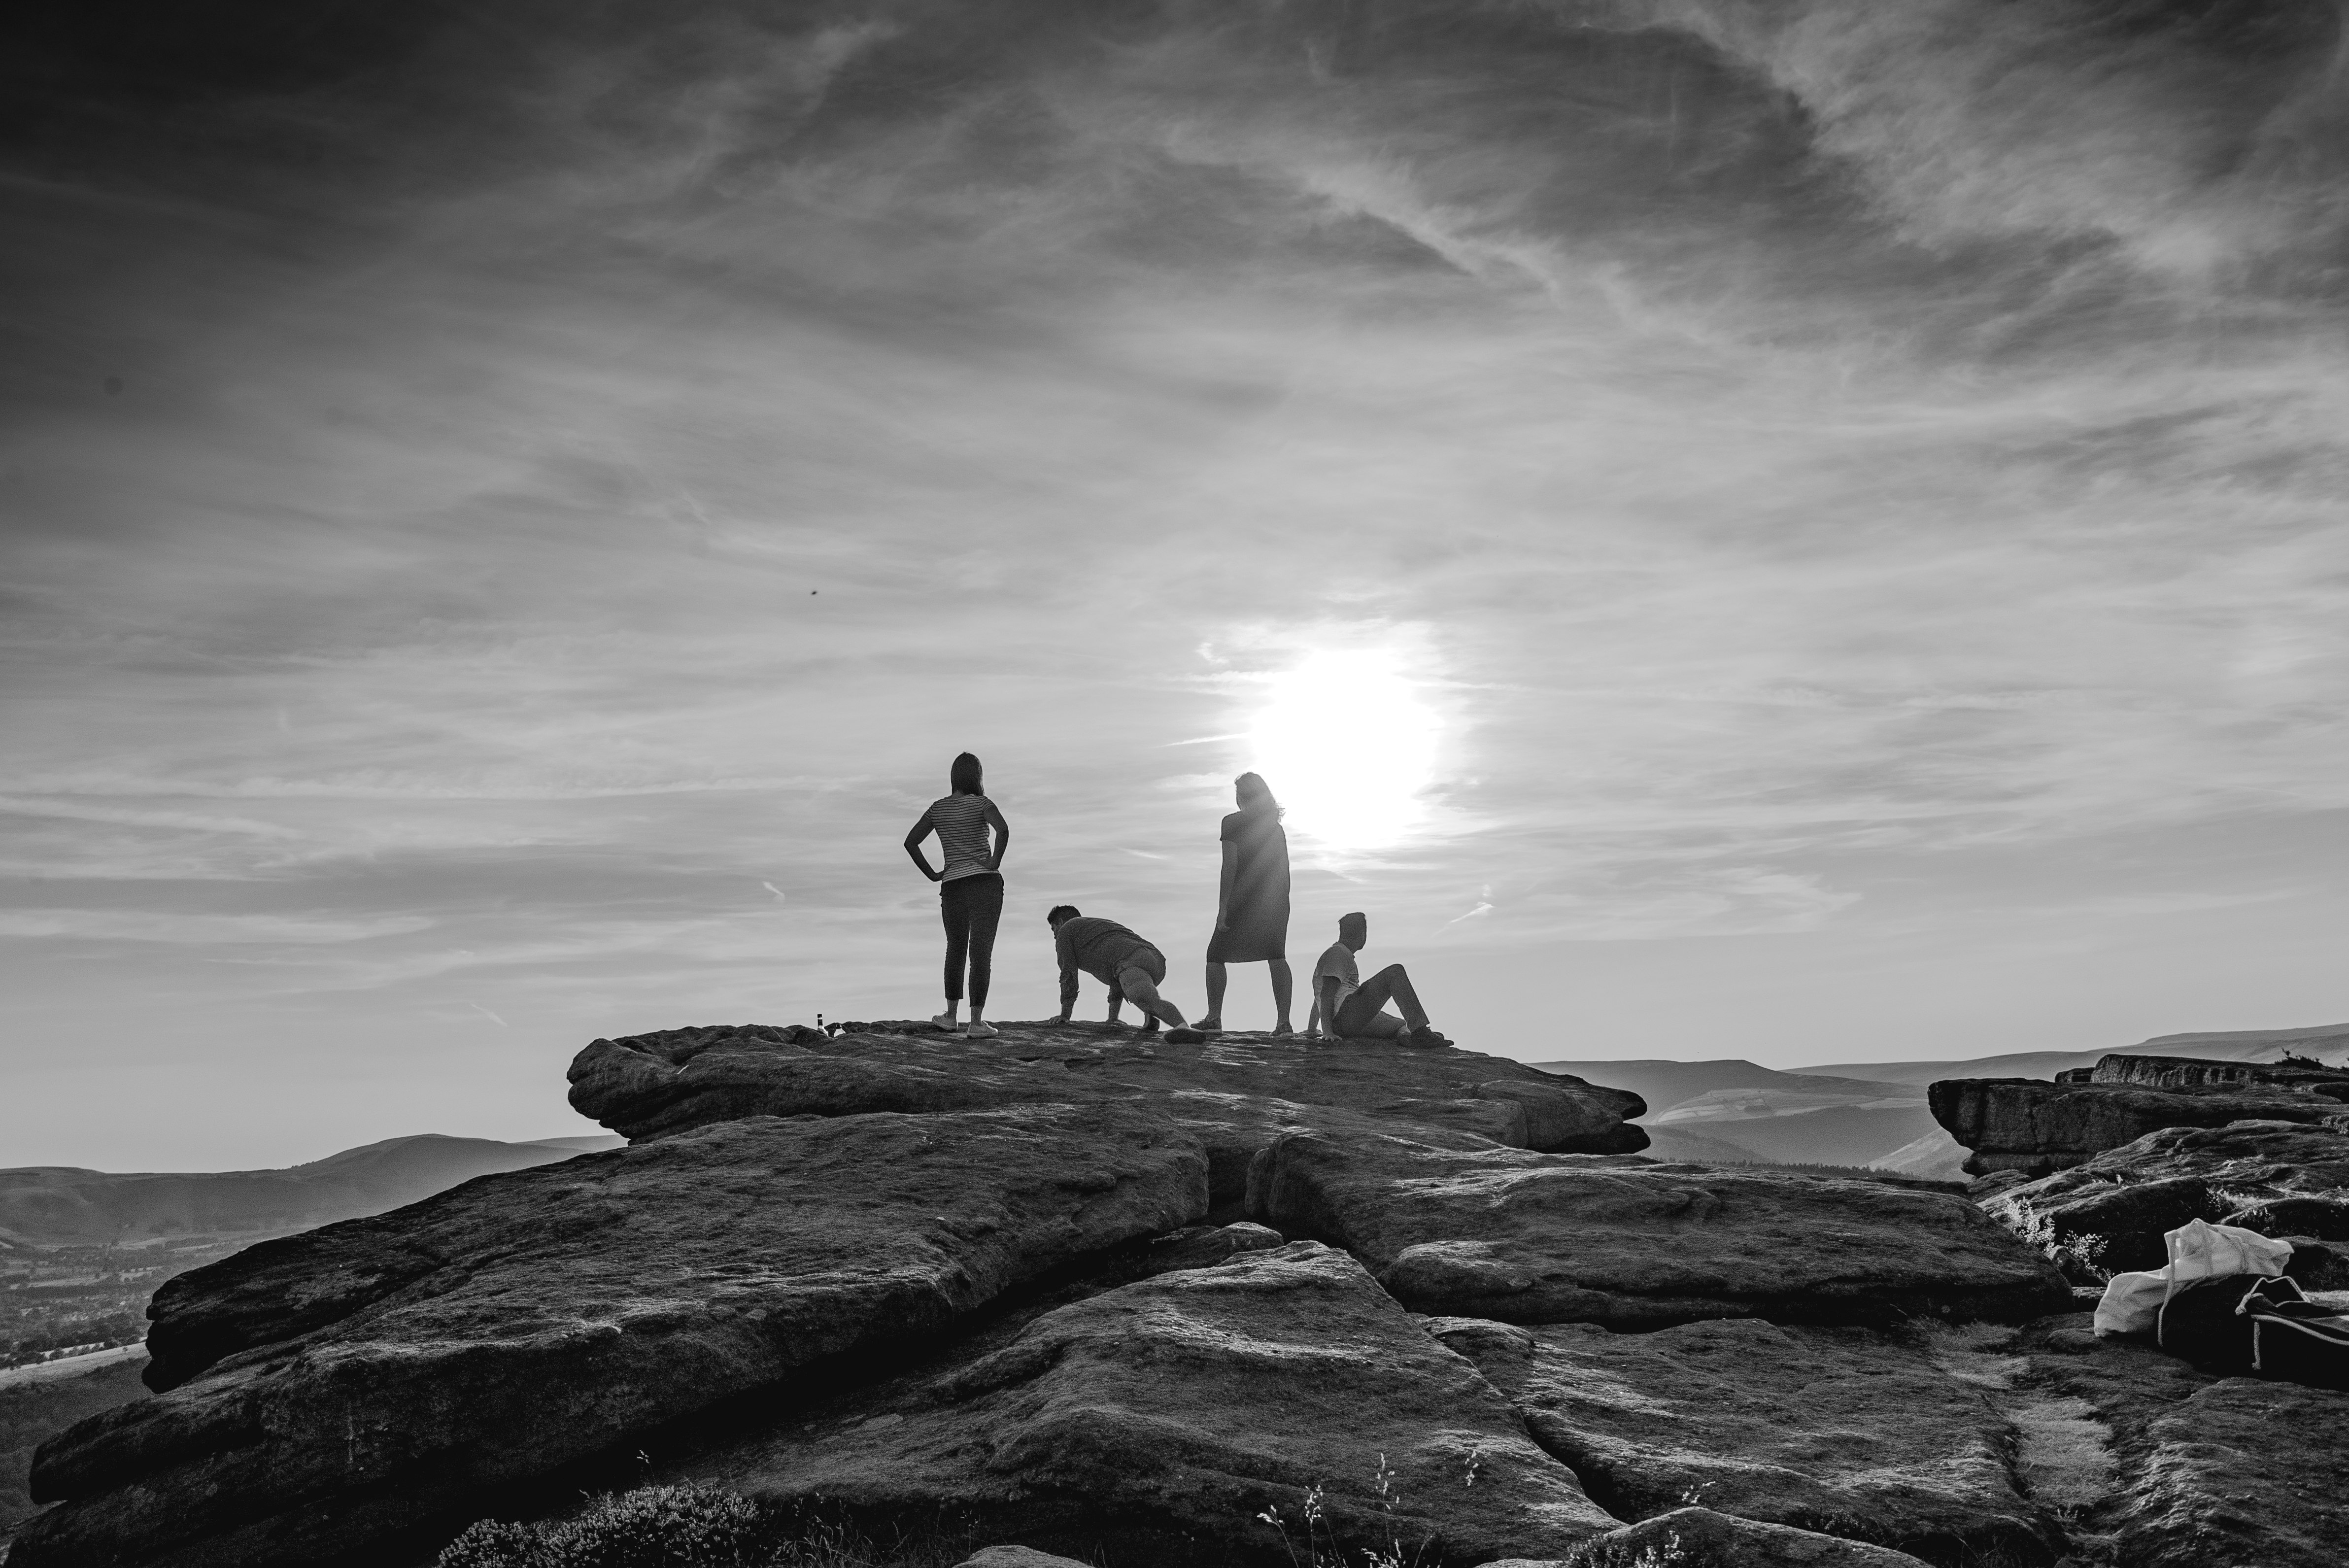 silhouette of 3 people standing on rock formation near body of water during daytime